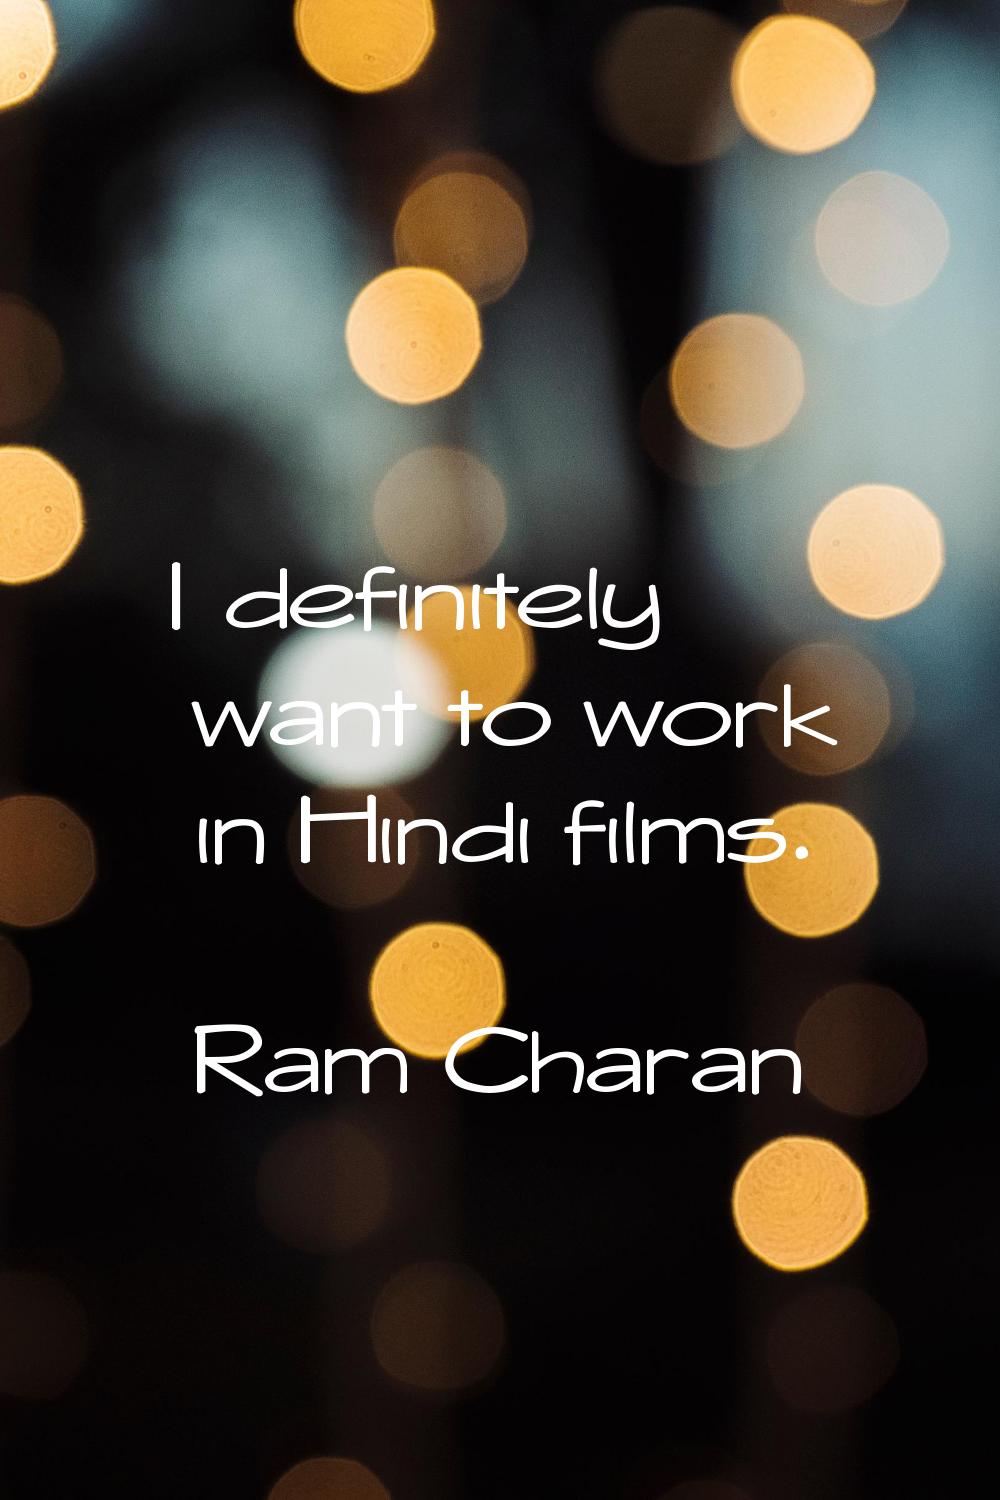 I definitely want to work in Hindi films.